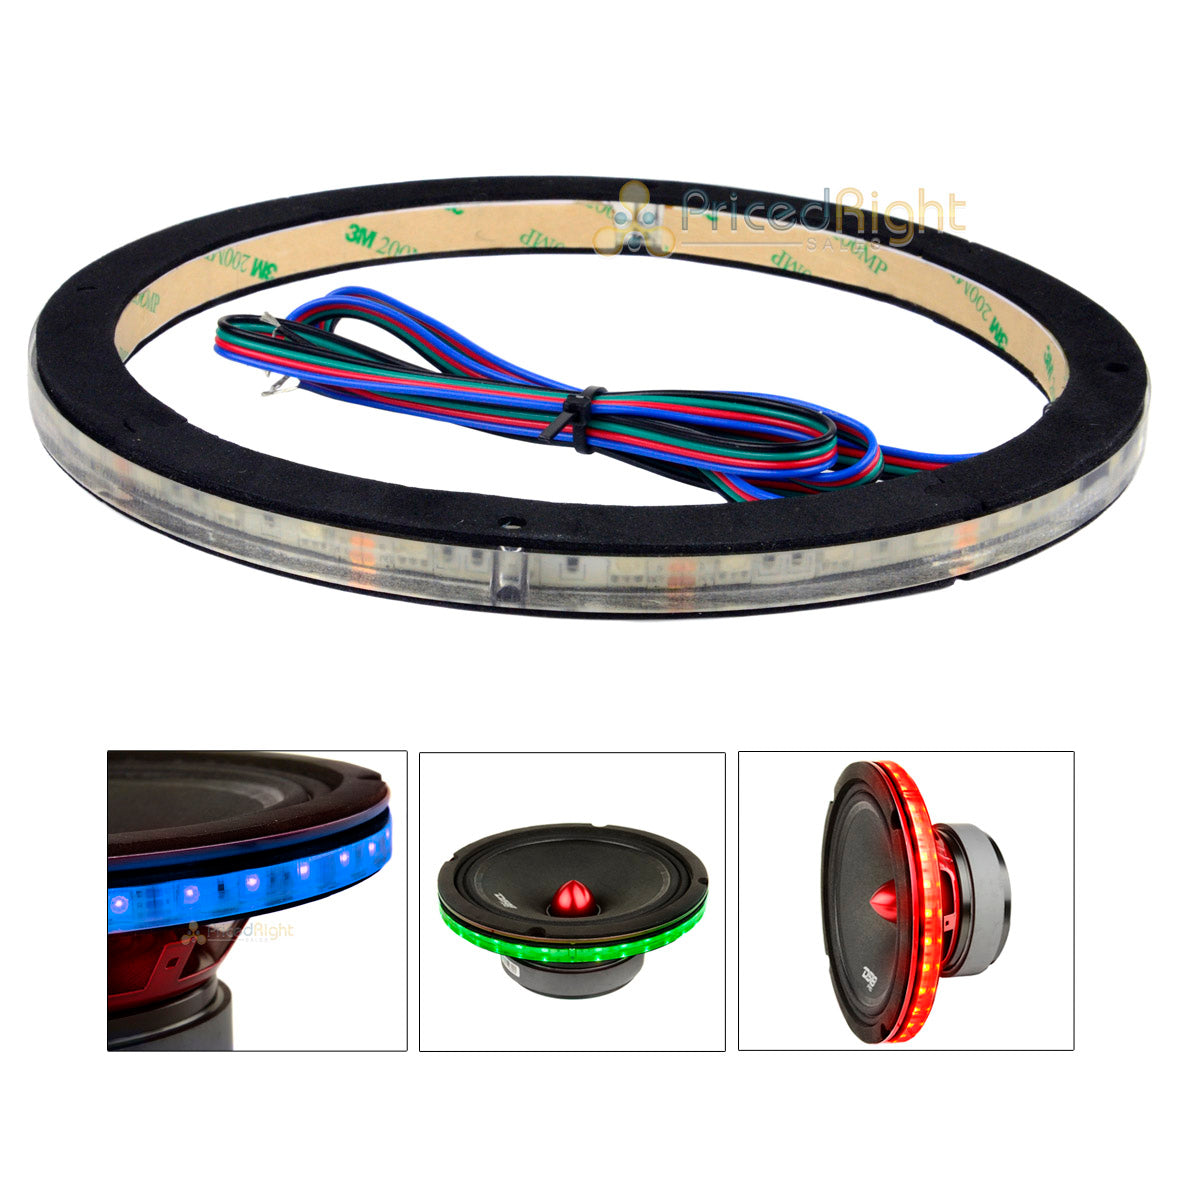 12 " Waterproof RGB LED Speaker Ring 1/2" Spacer DS18 LRING12 Accent Single